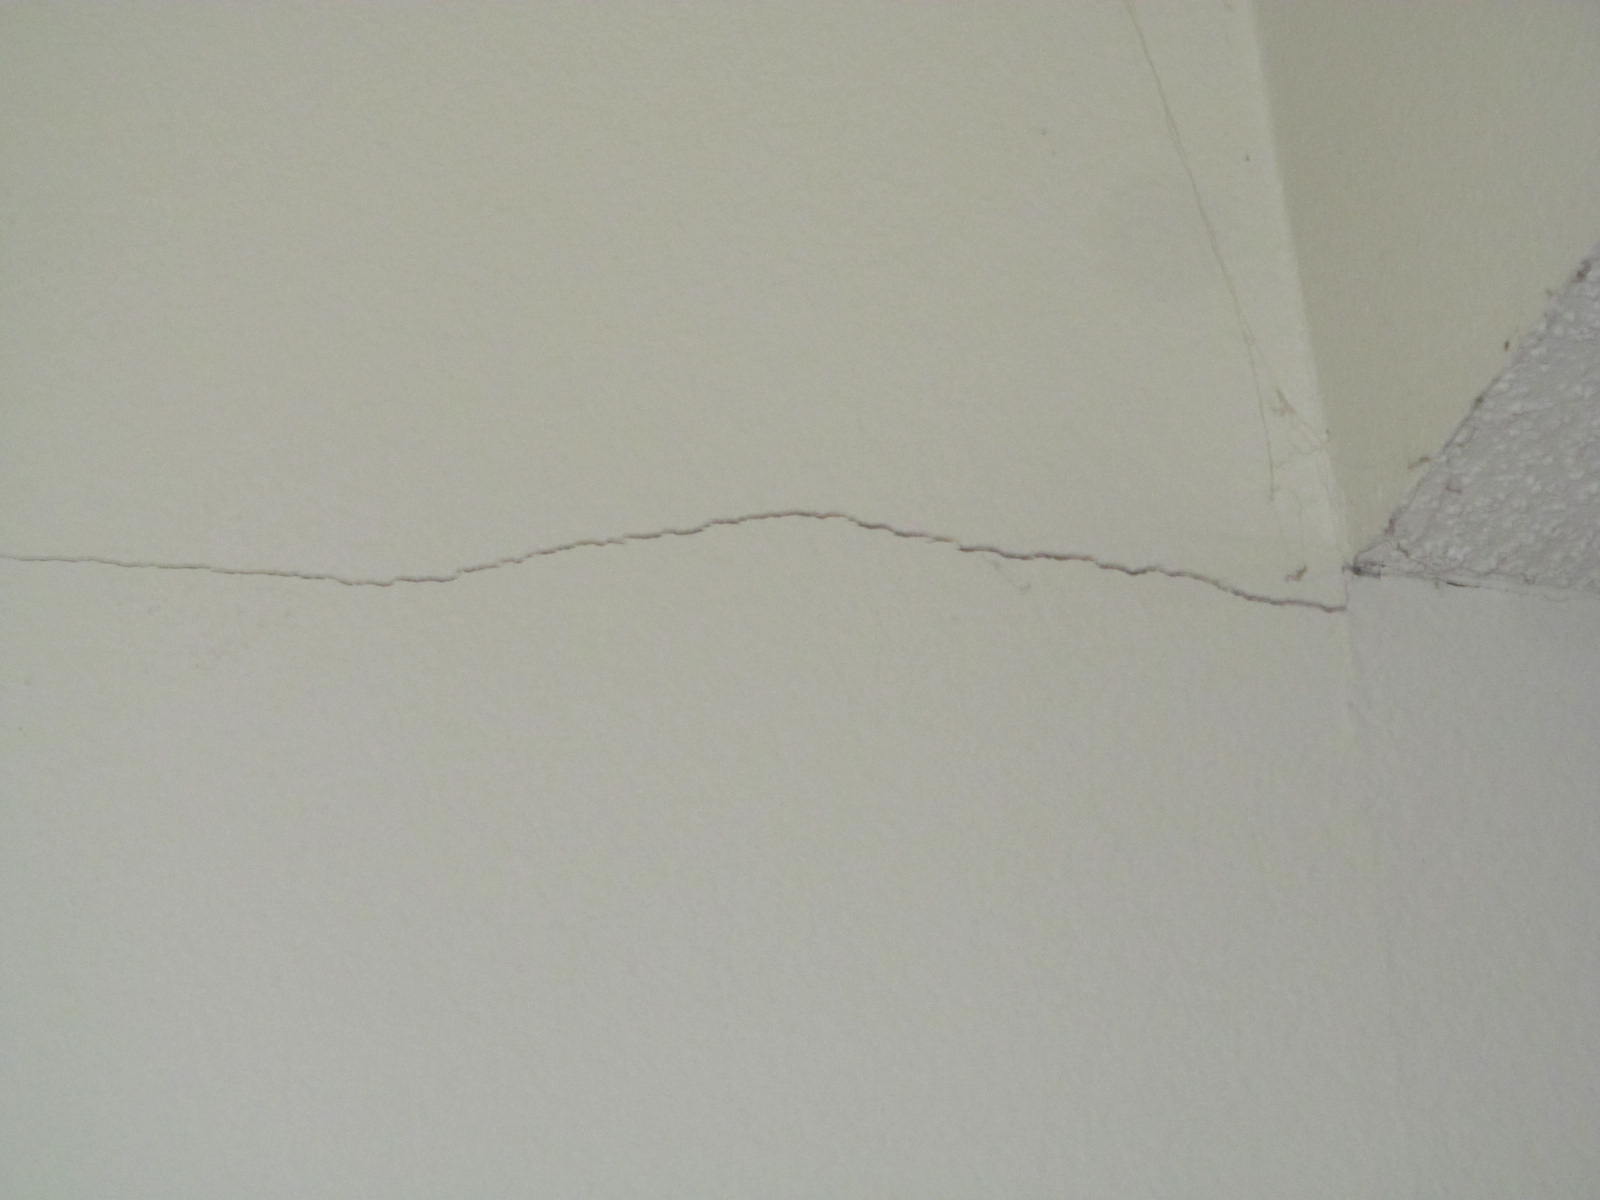 Hairline crack in drywall from joint